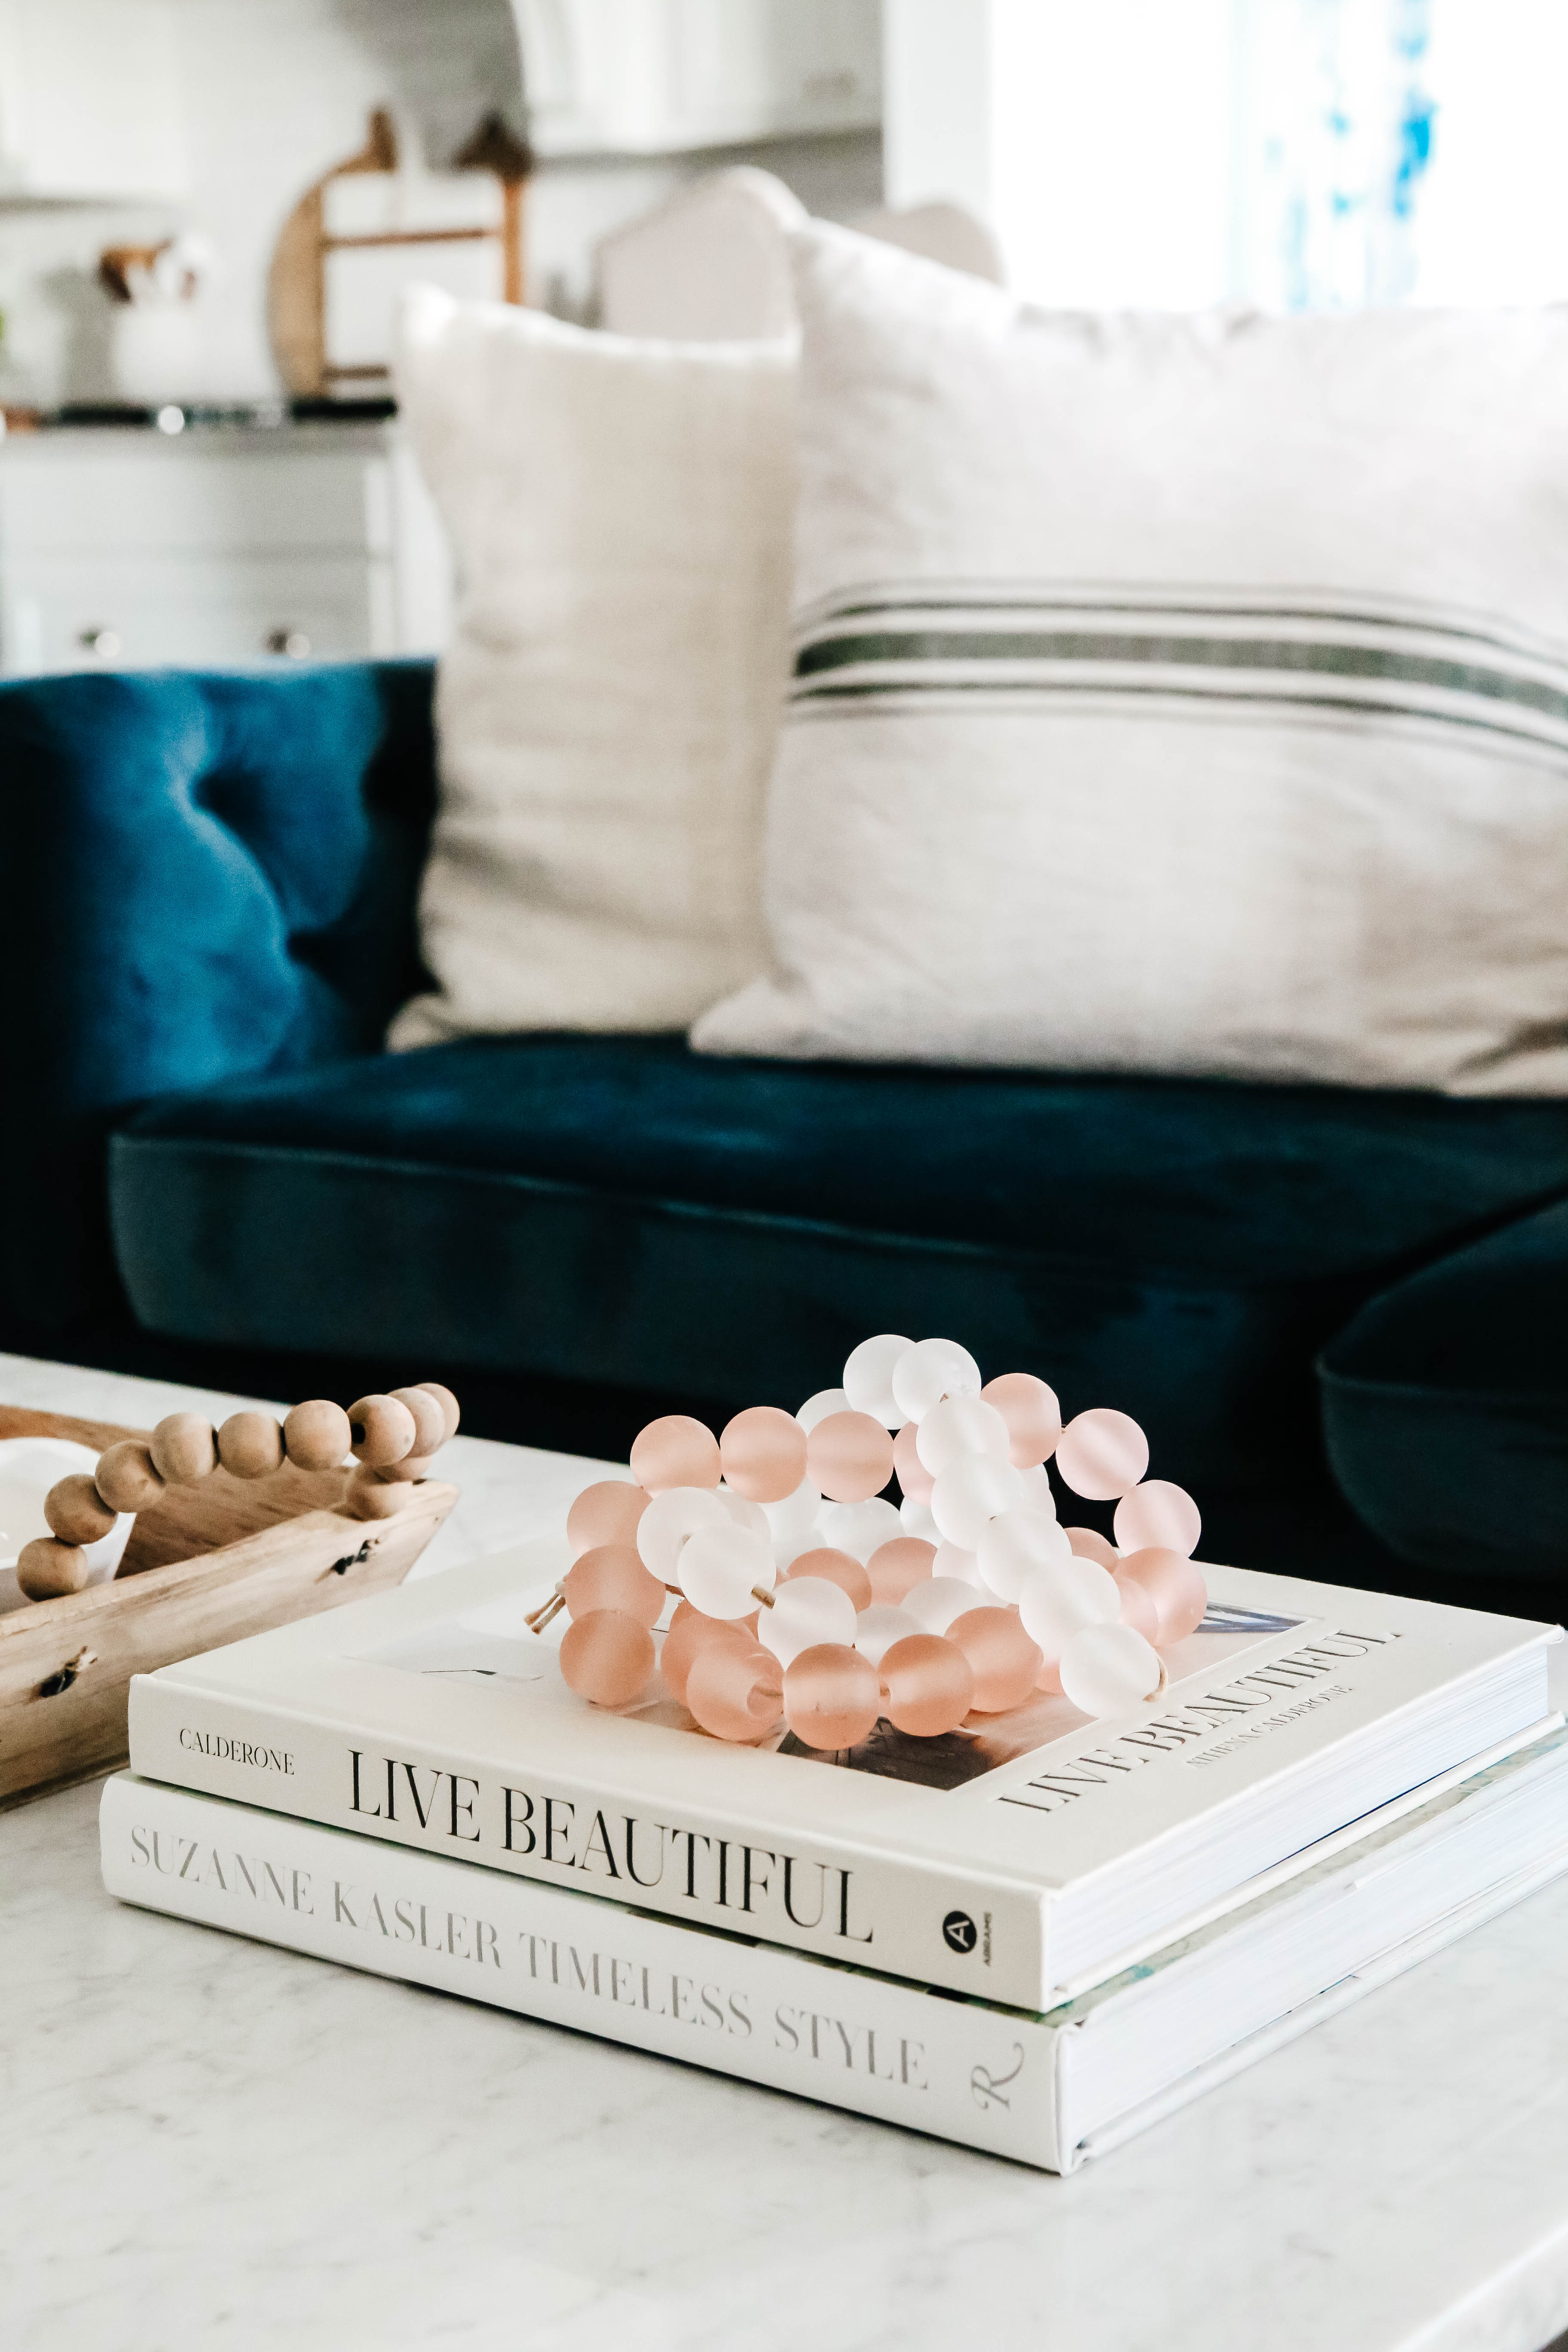 How To Style Throw Pillows, A Blissful Nest